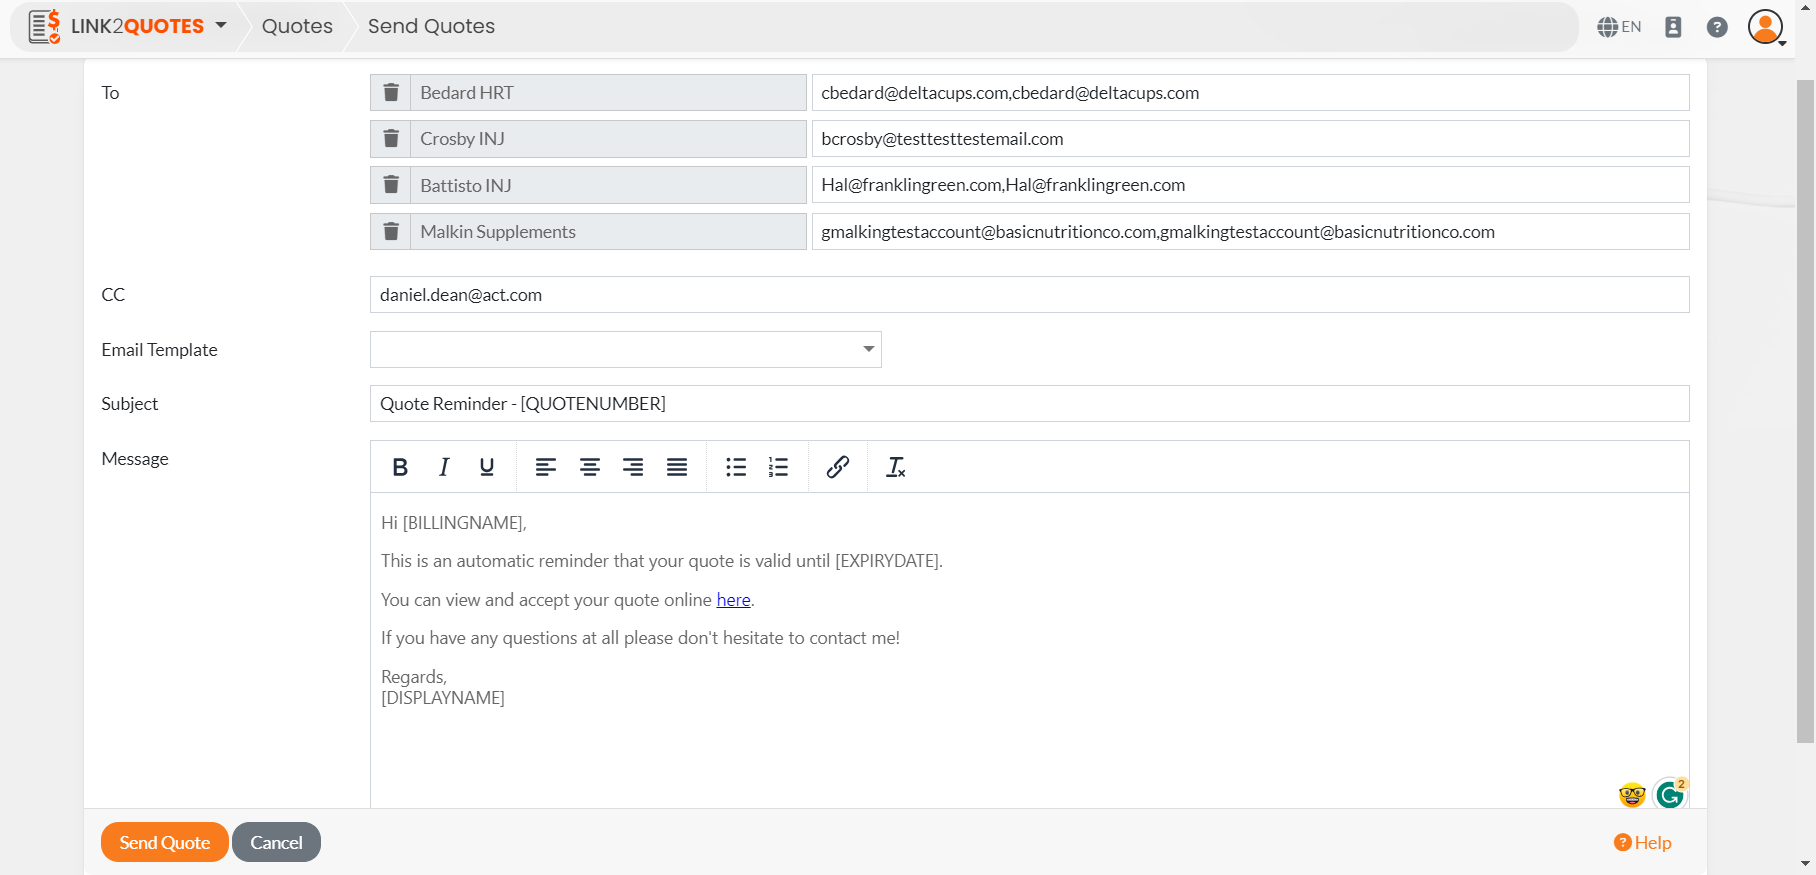 screen shot showing how to batch-edit quotes and send updates in bulk to save time and streamline operations